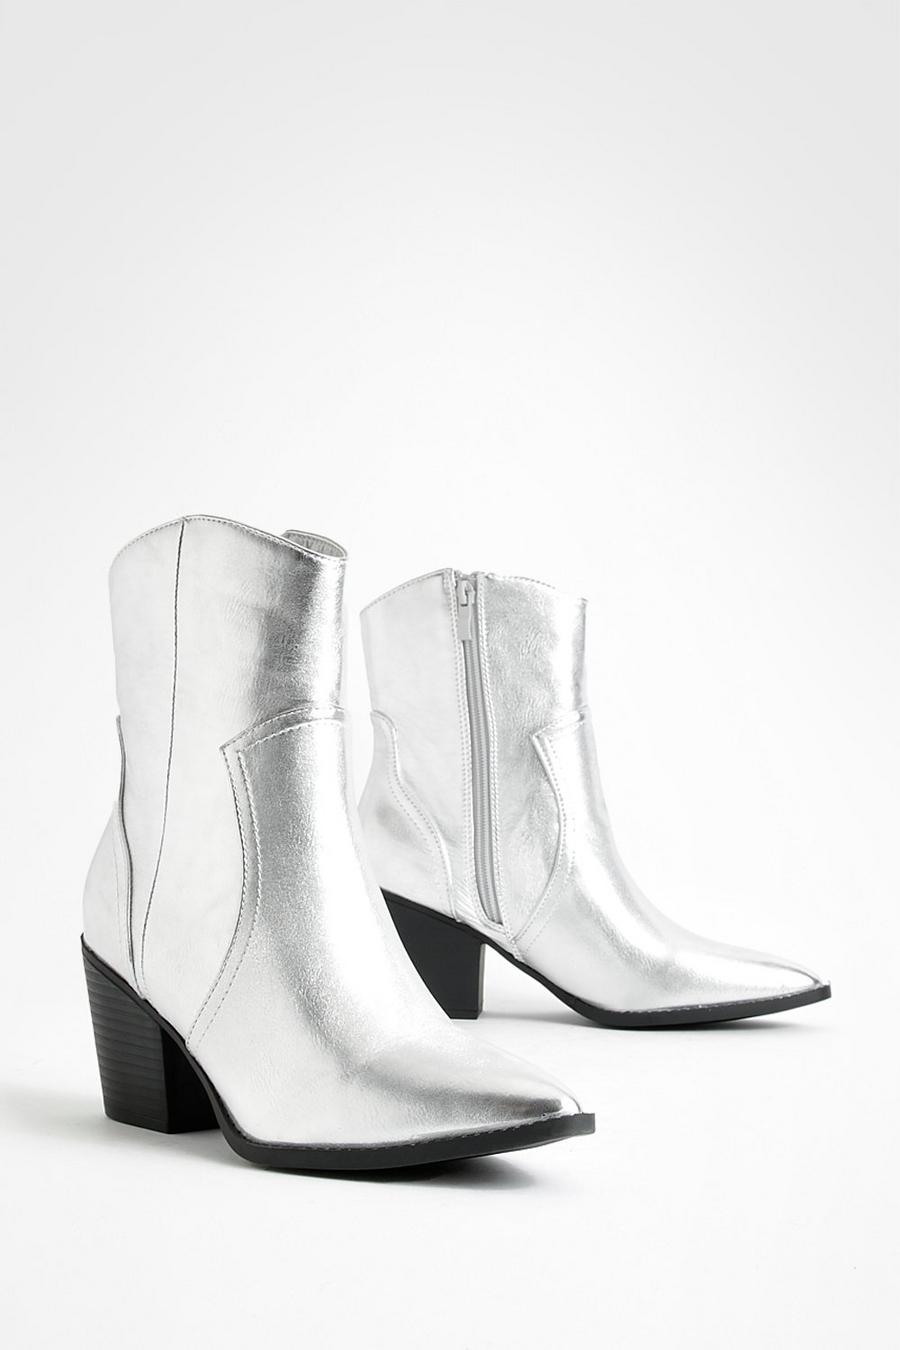 Silver argent Metallic Western Cowboy Ankle Boots 